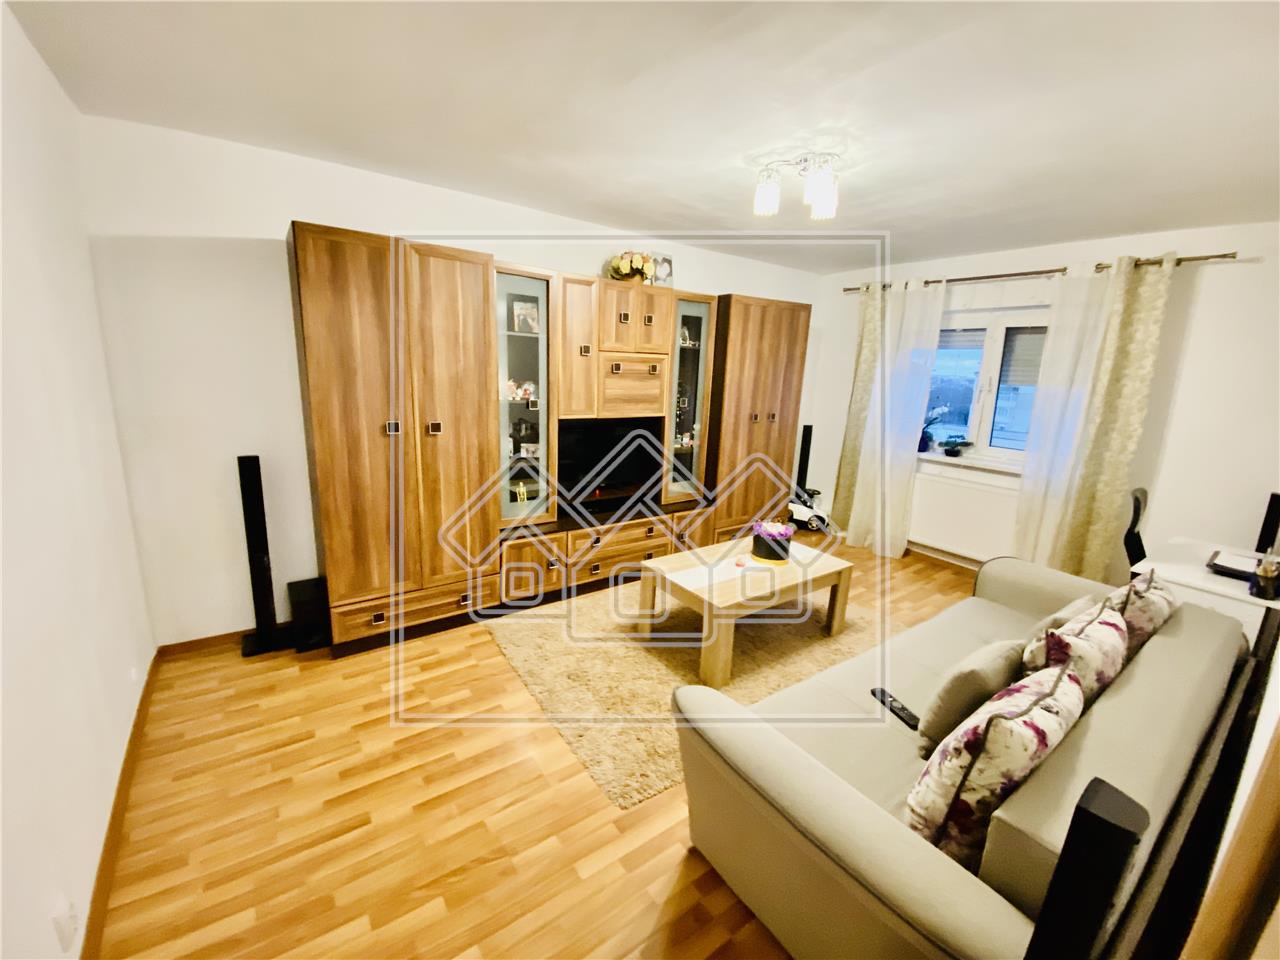 Apartment for sale in Sibiu - 2 rooms and balcony - Strand area